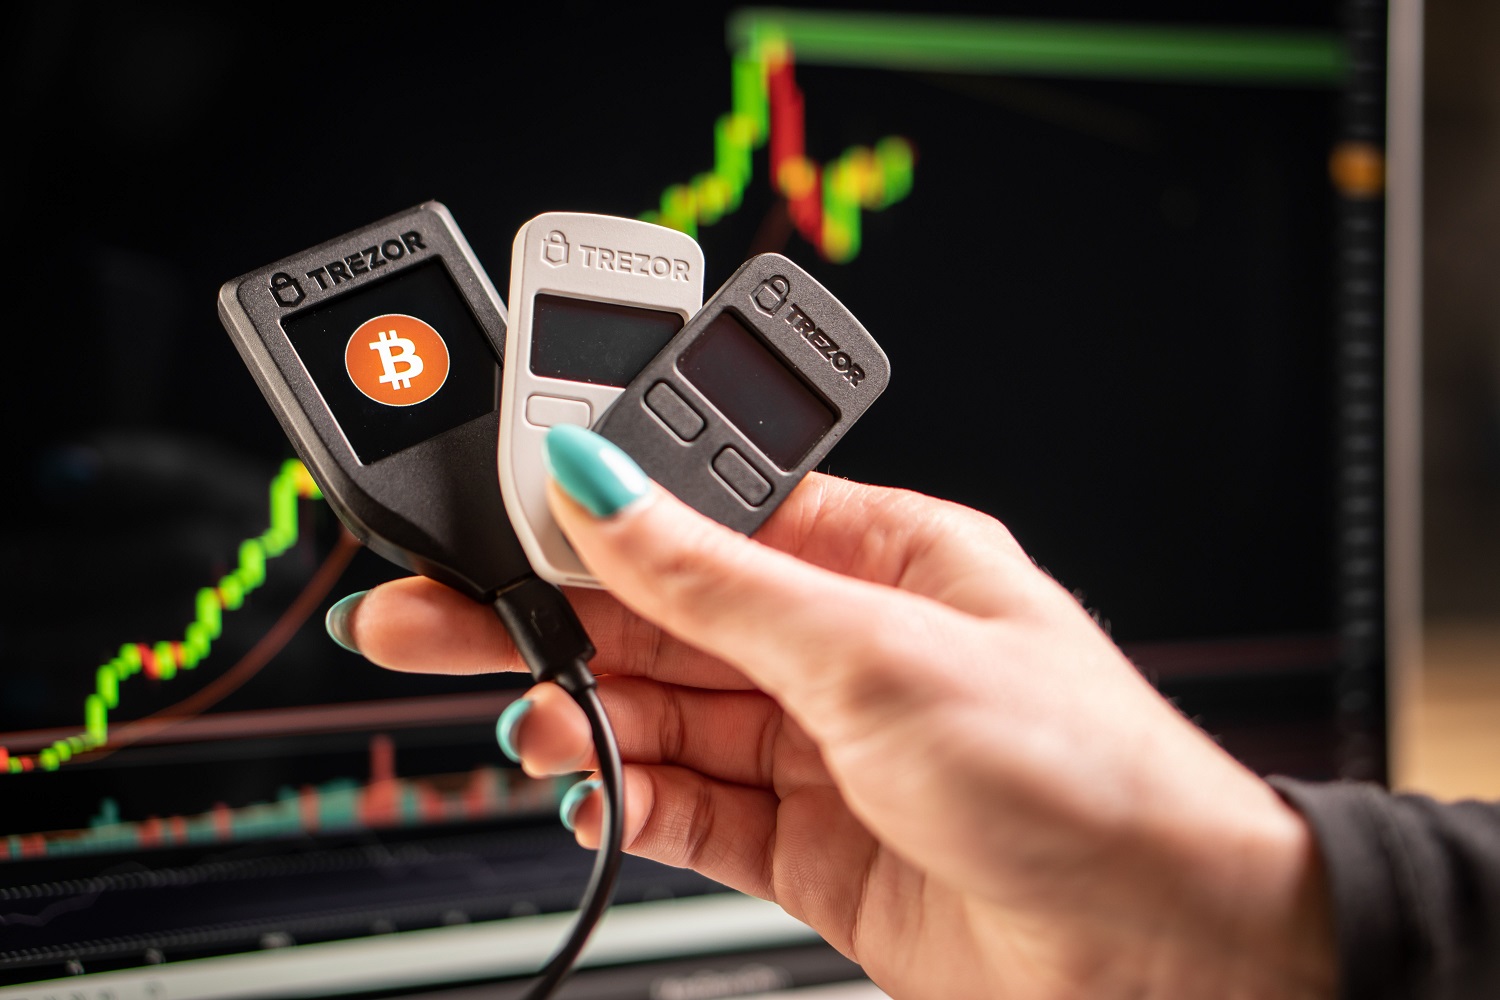 How to Buy Bitcoin on Trezor Wallet: A Step-by-Step Guide